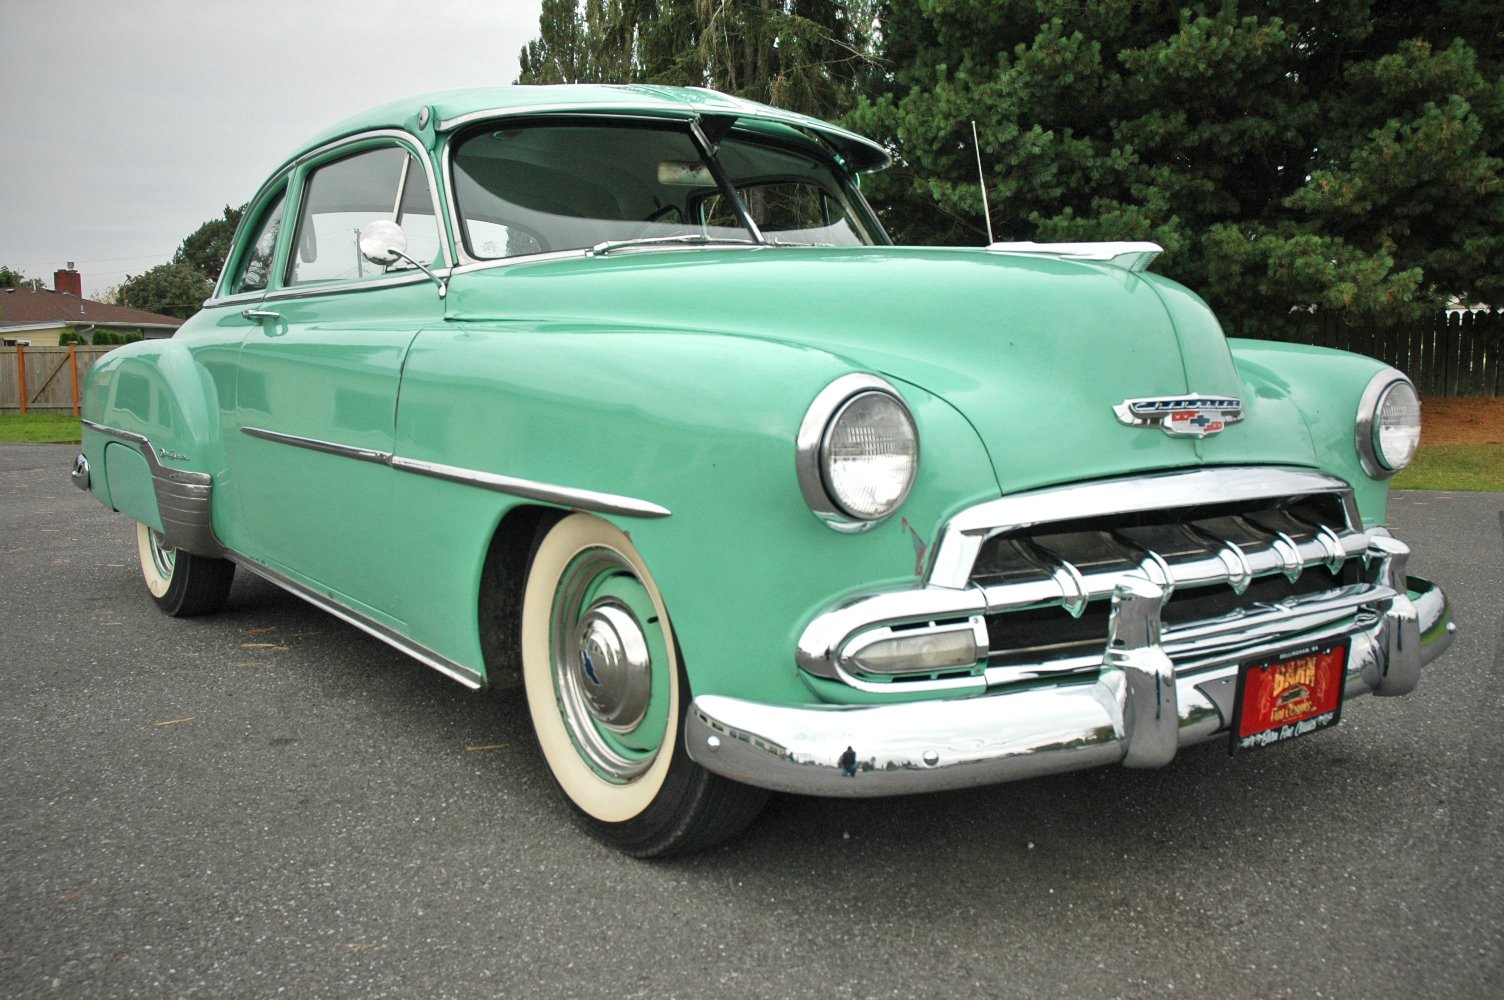 1952, Chevrolet, Fleetmaster, Deluxe, Coupe, Classic, Old, Vintage, Usa, 1500x1000 06 Wallpaper